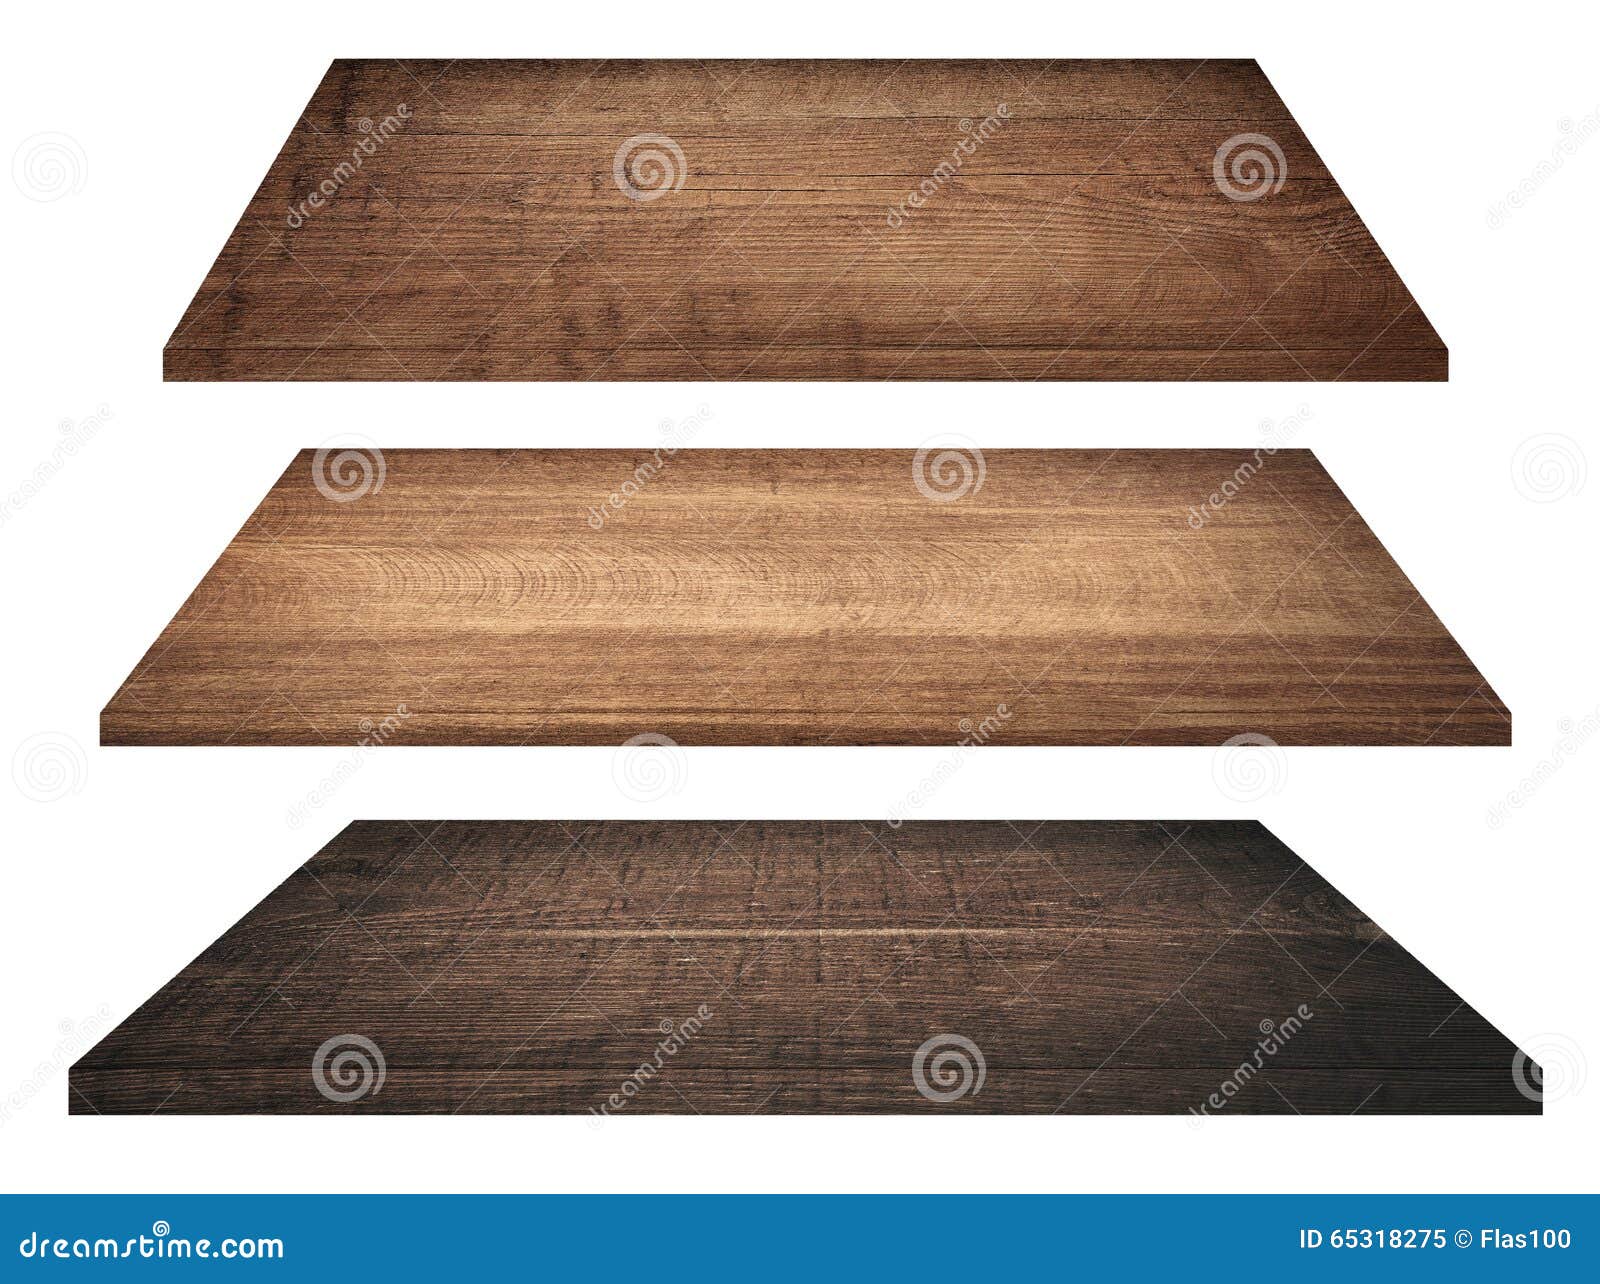 wooden shelves, tabletop or cutting board 